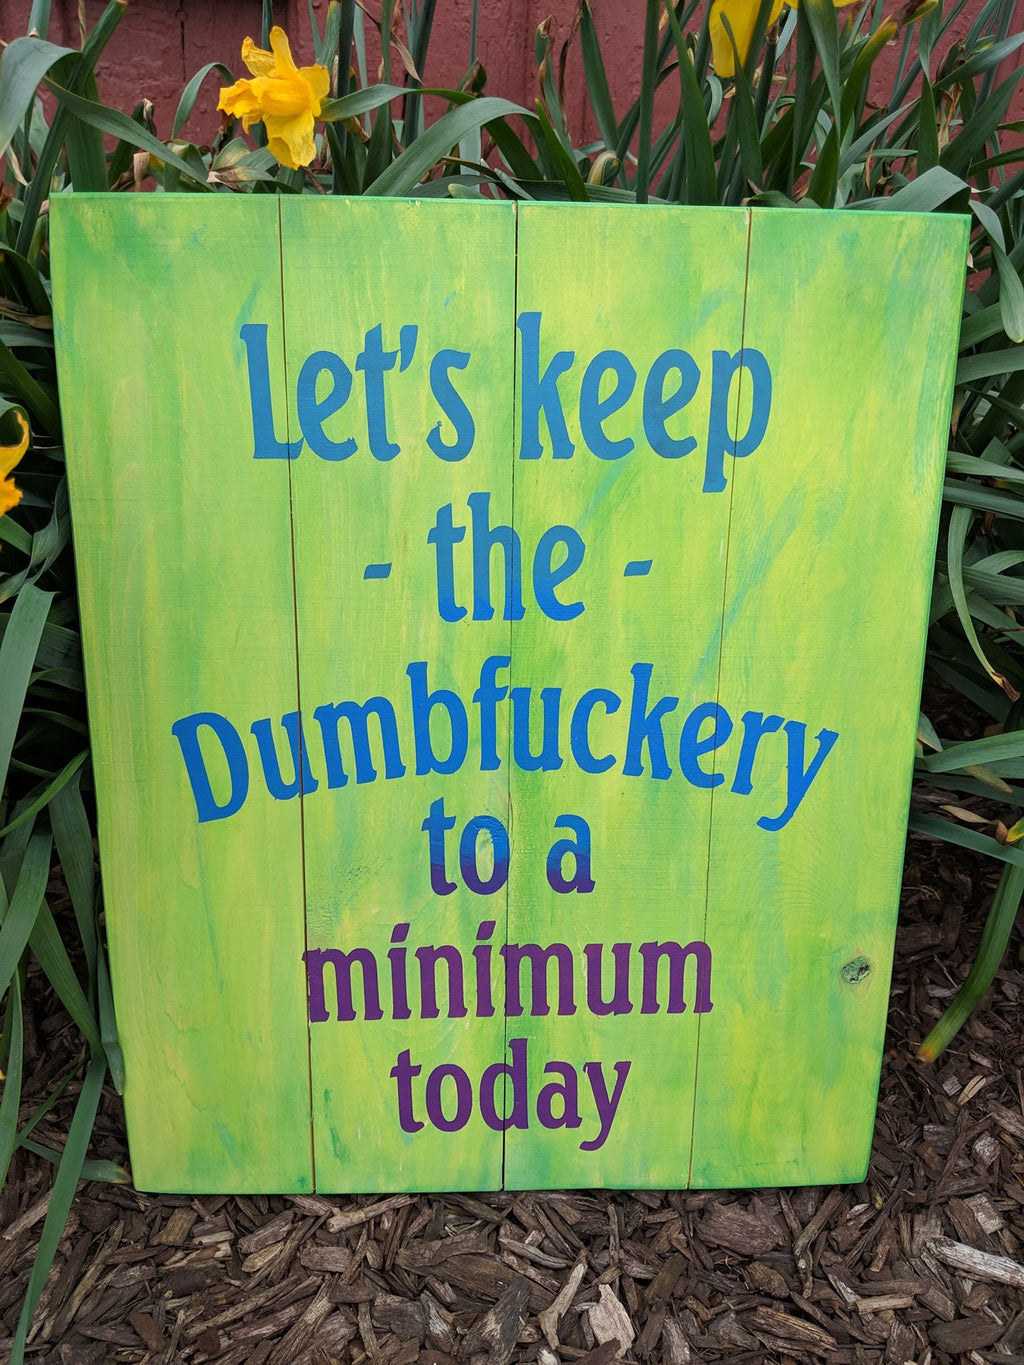 Let's keep the dumbfuckery to a minimum today